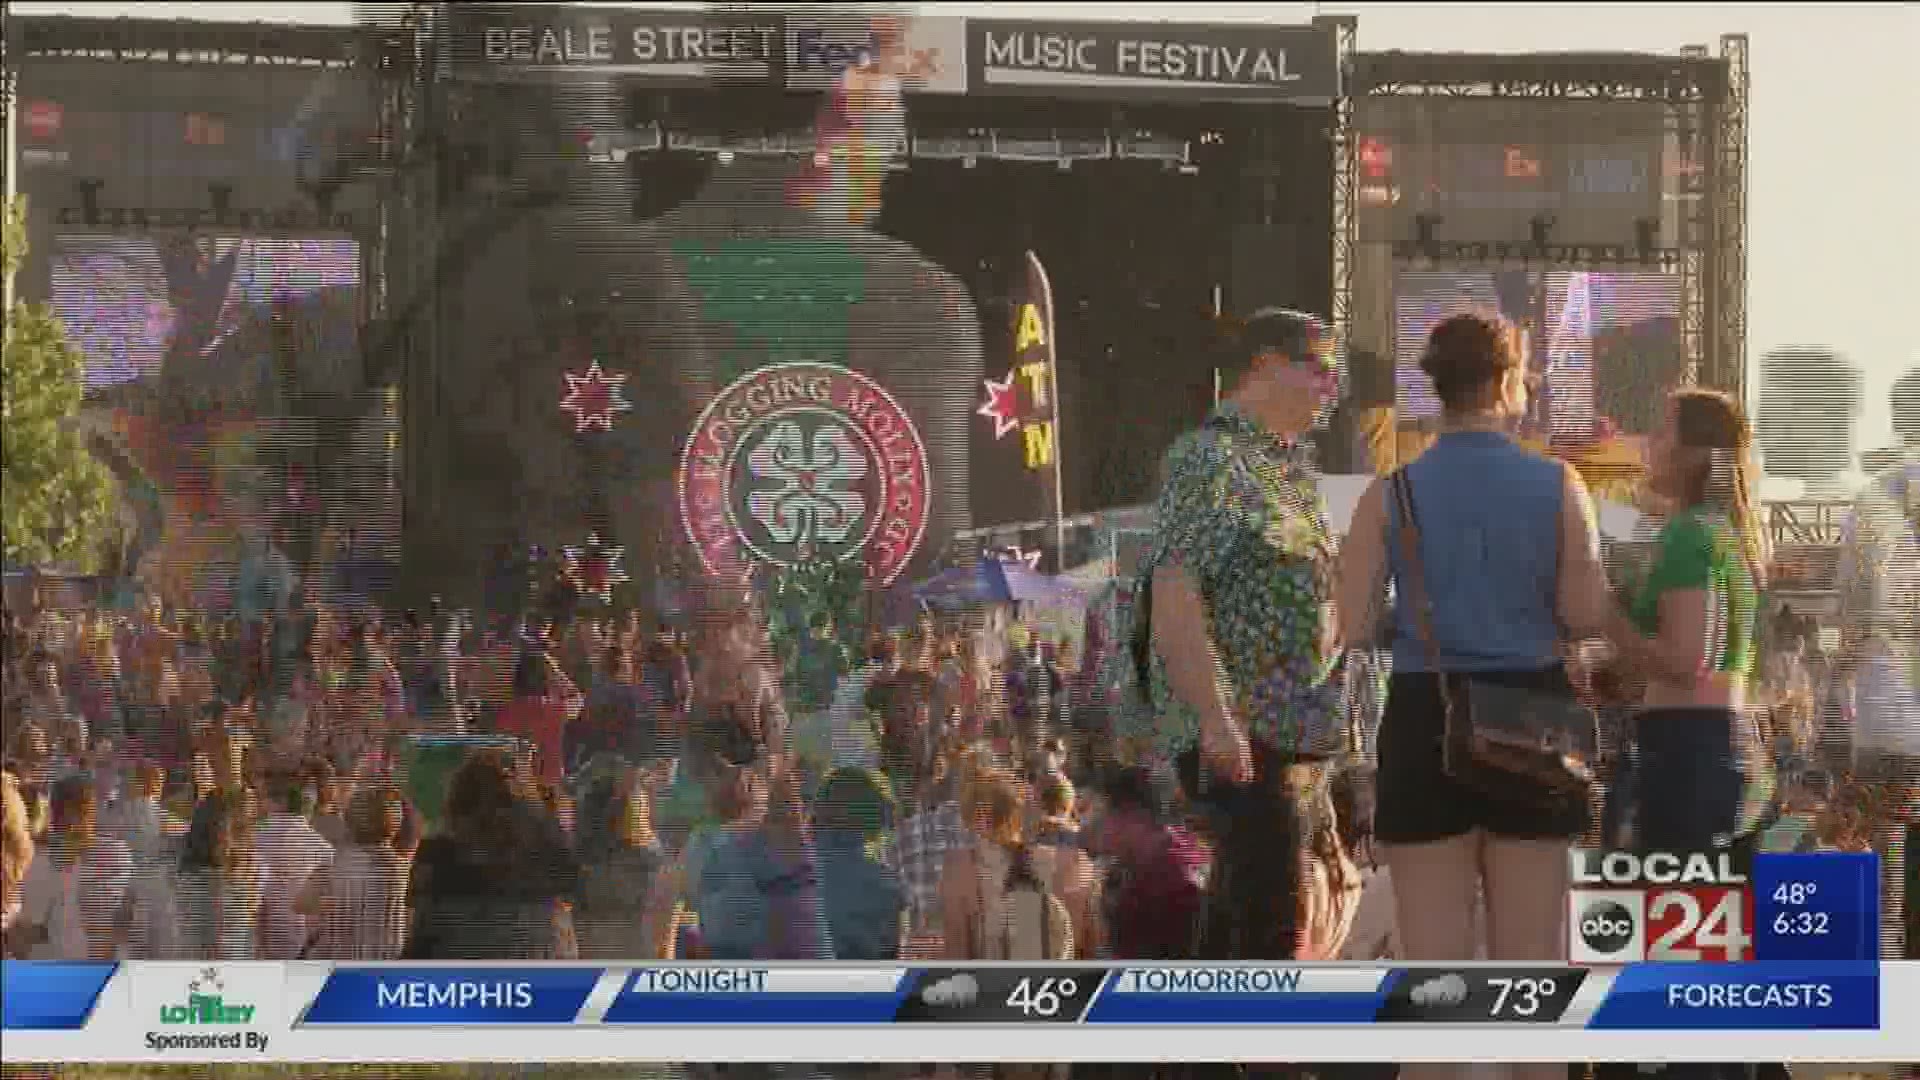 With Coachella being the latest event to postpone due to COVID-19, Memphis in May officials say there are  no plans to cancel Beale St. Music Festival.